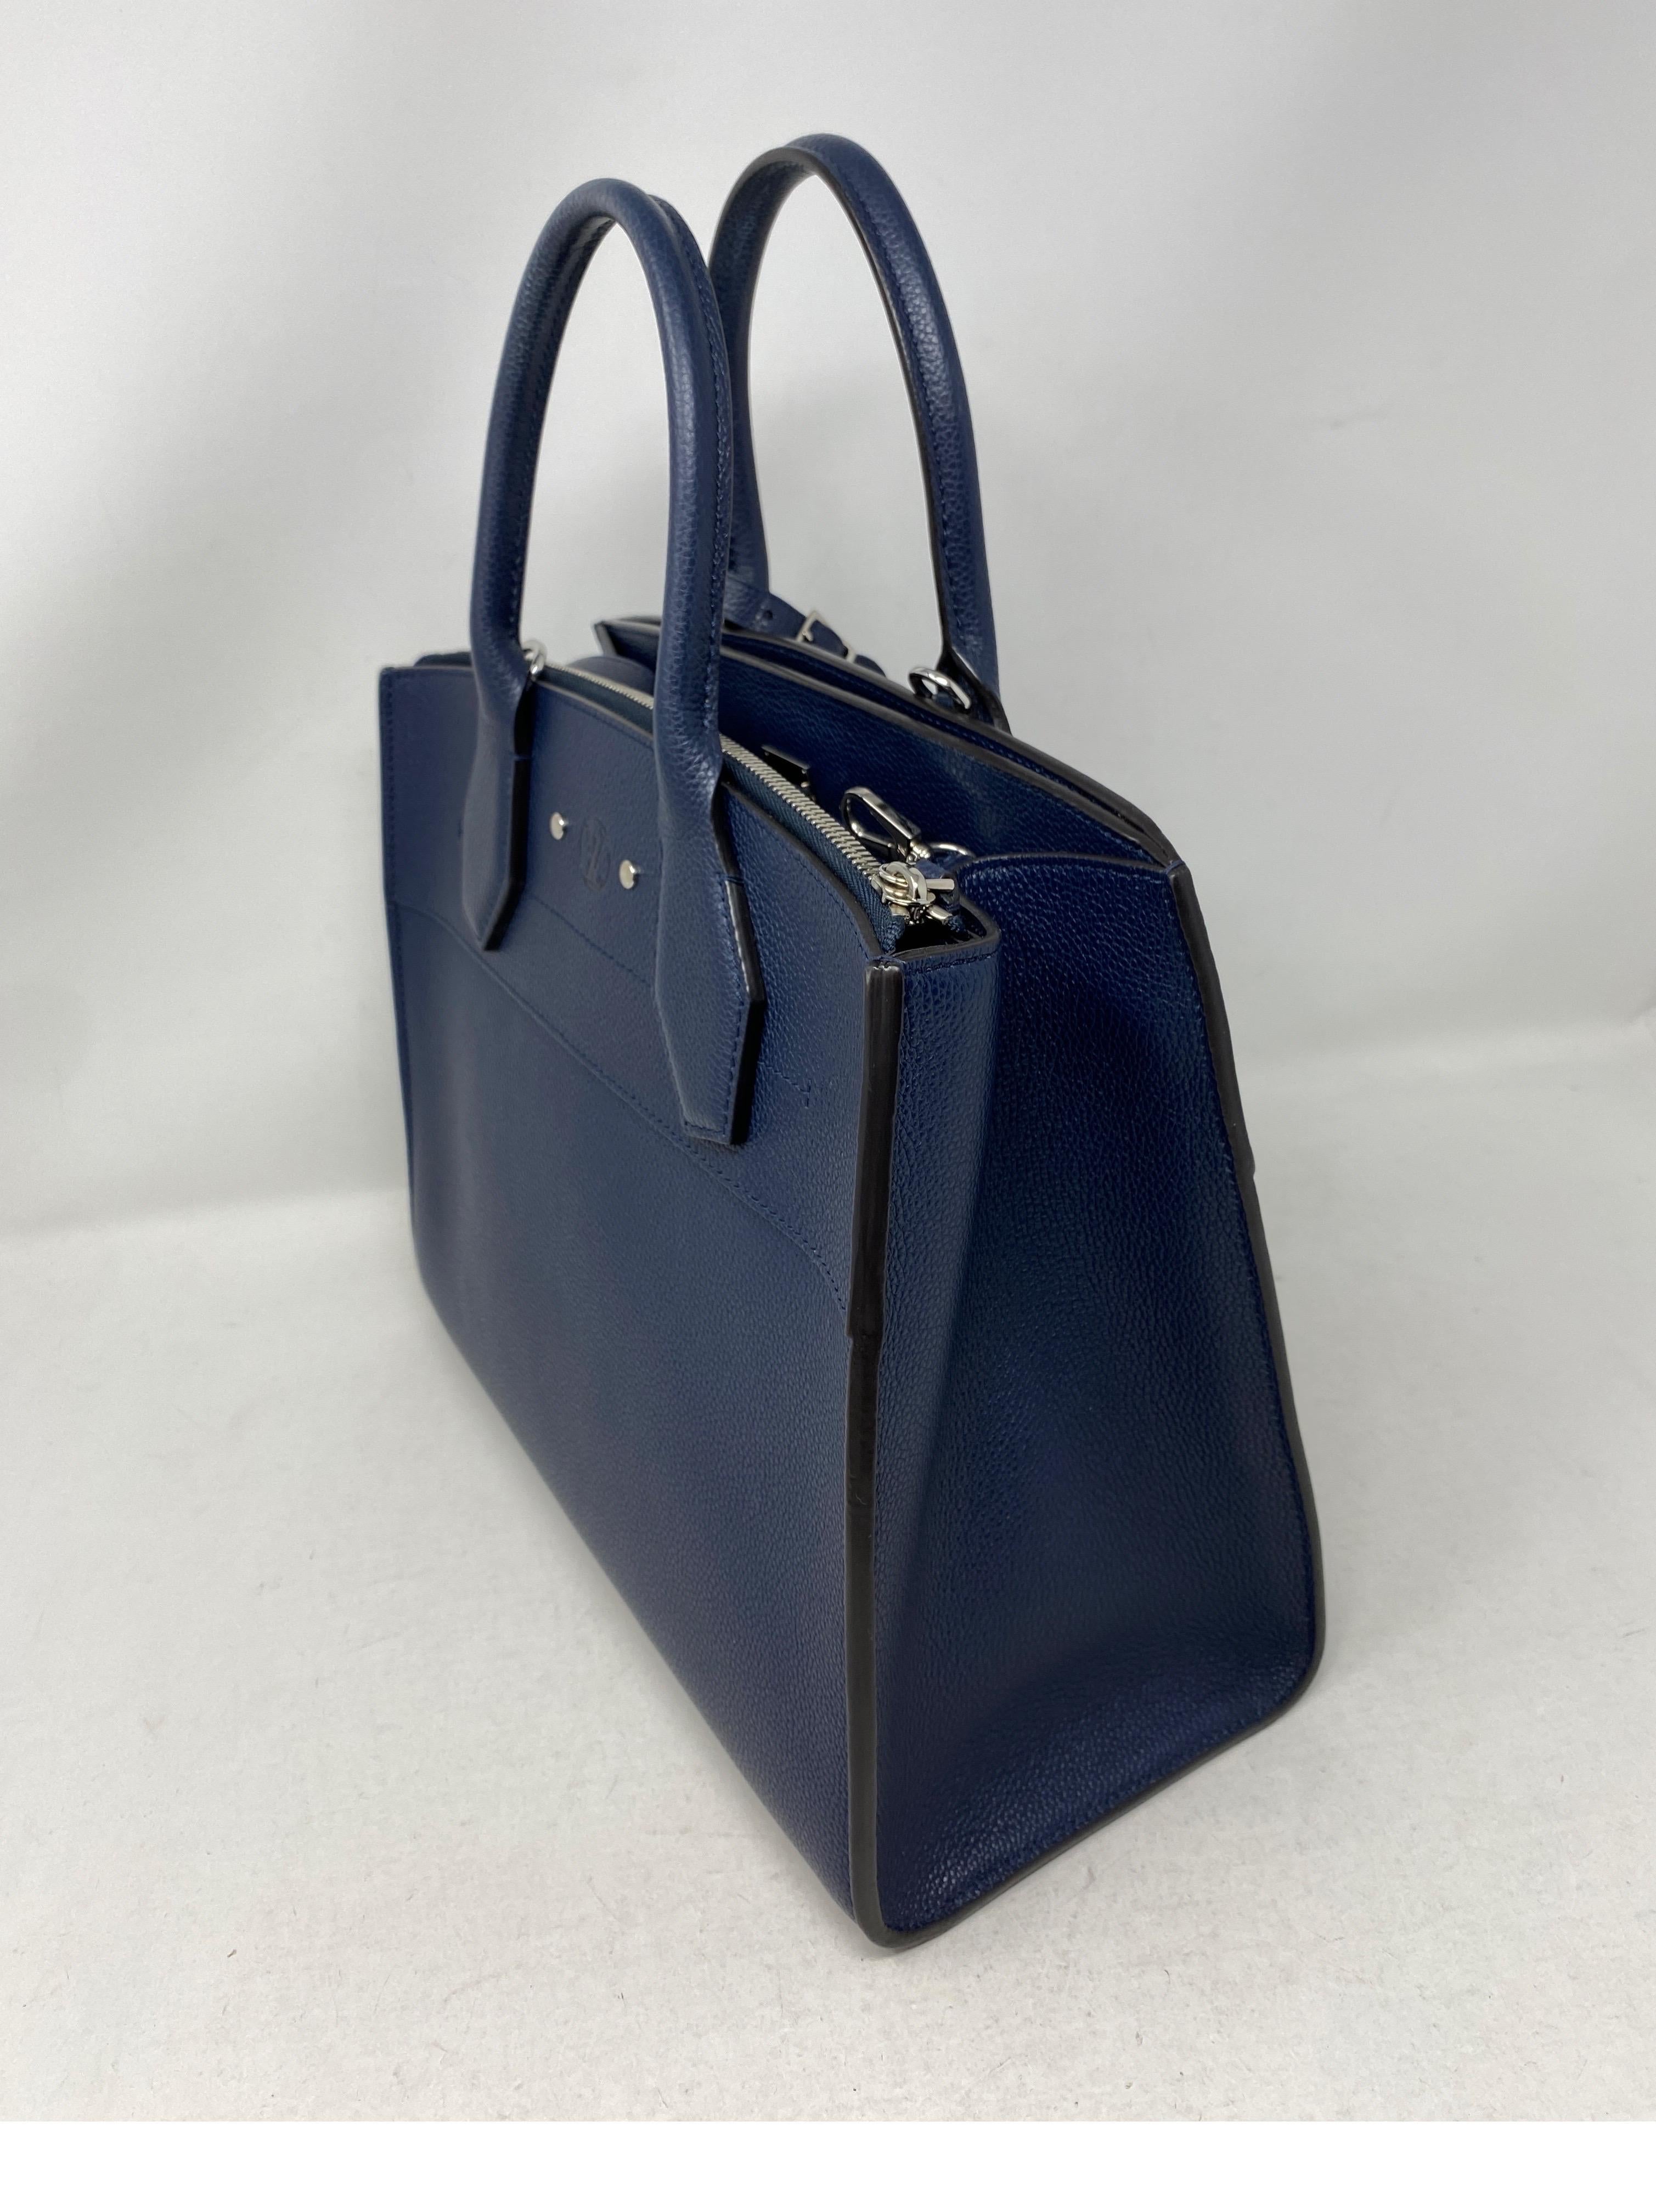 Louis Vuitton Steamer Navy Bag. Beautiful navy leather bag in excellent like new condition. High quality leather from LV. Can be worn as a top handle bag or with strap as a shoulder bag. Silver hardware. Guaranteed authentic. 